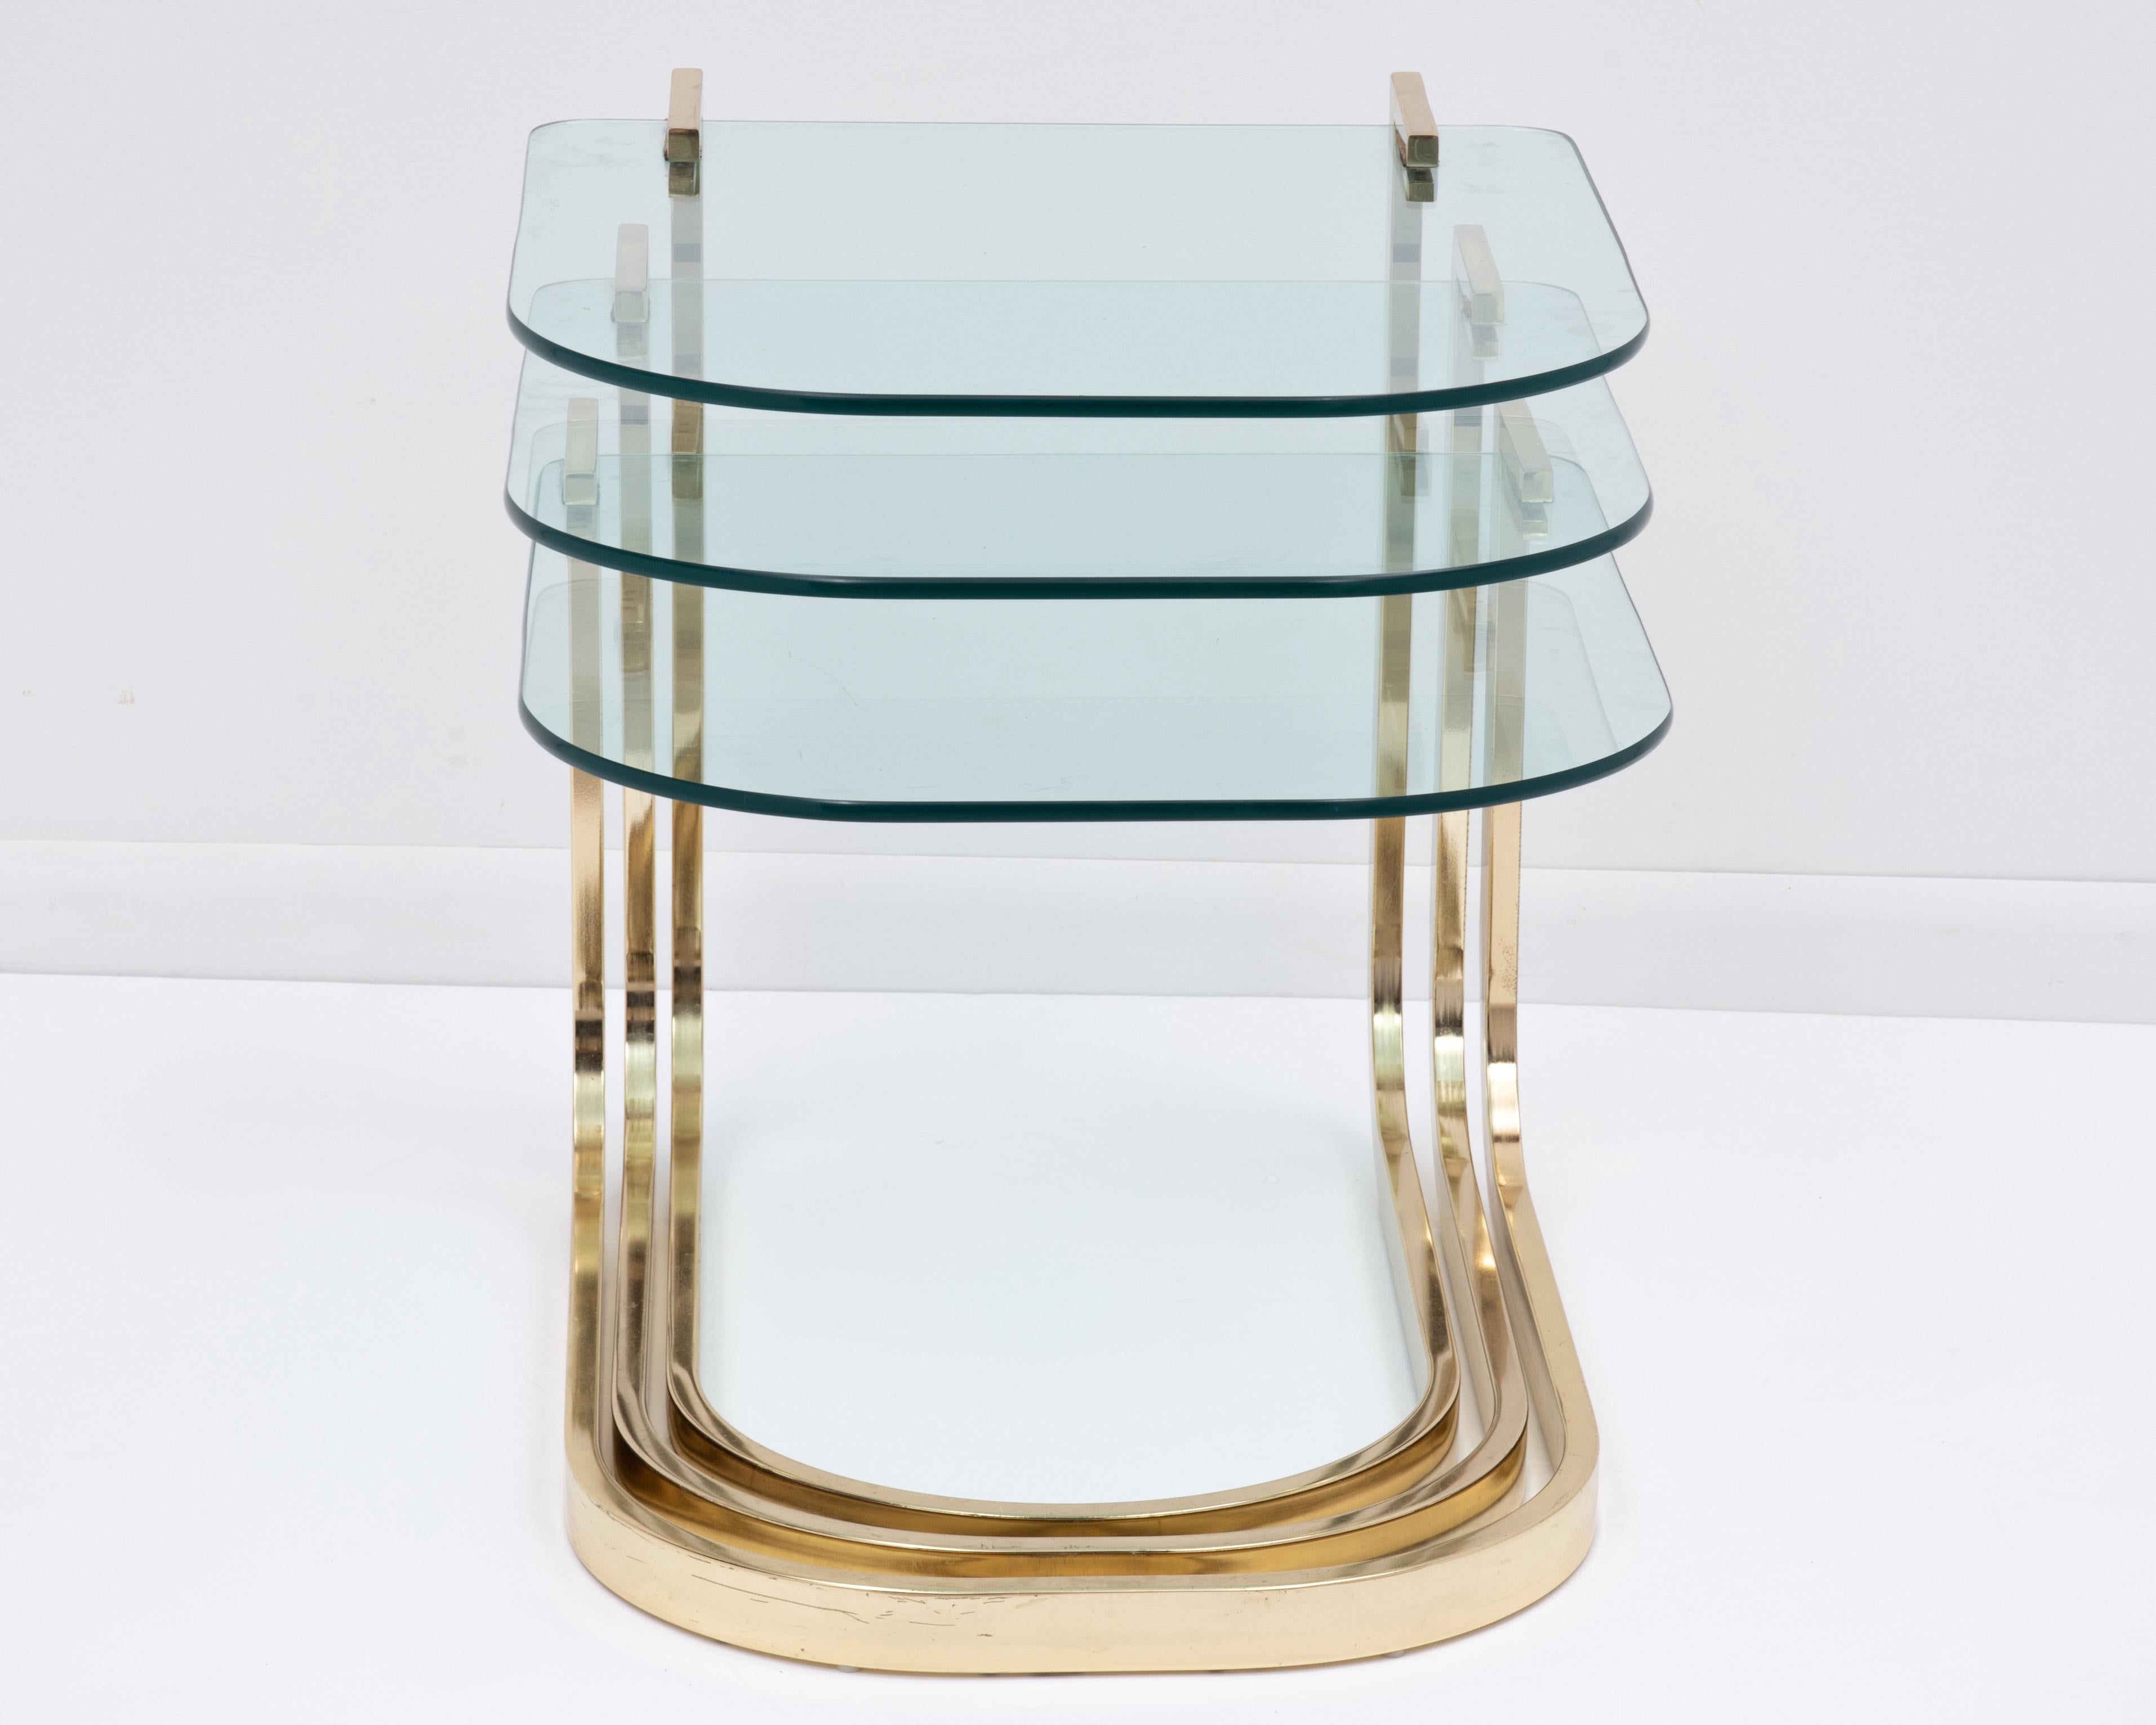 DIA Design Institute America Milo Baughman Nesting Tables Cantilevered Brass In Good Condition For Sale In Forest Grove, PA